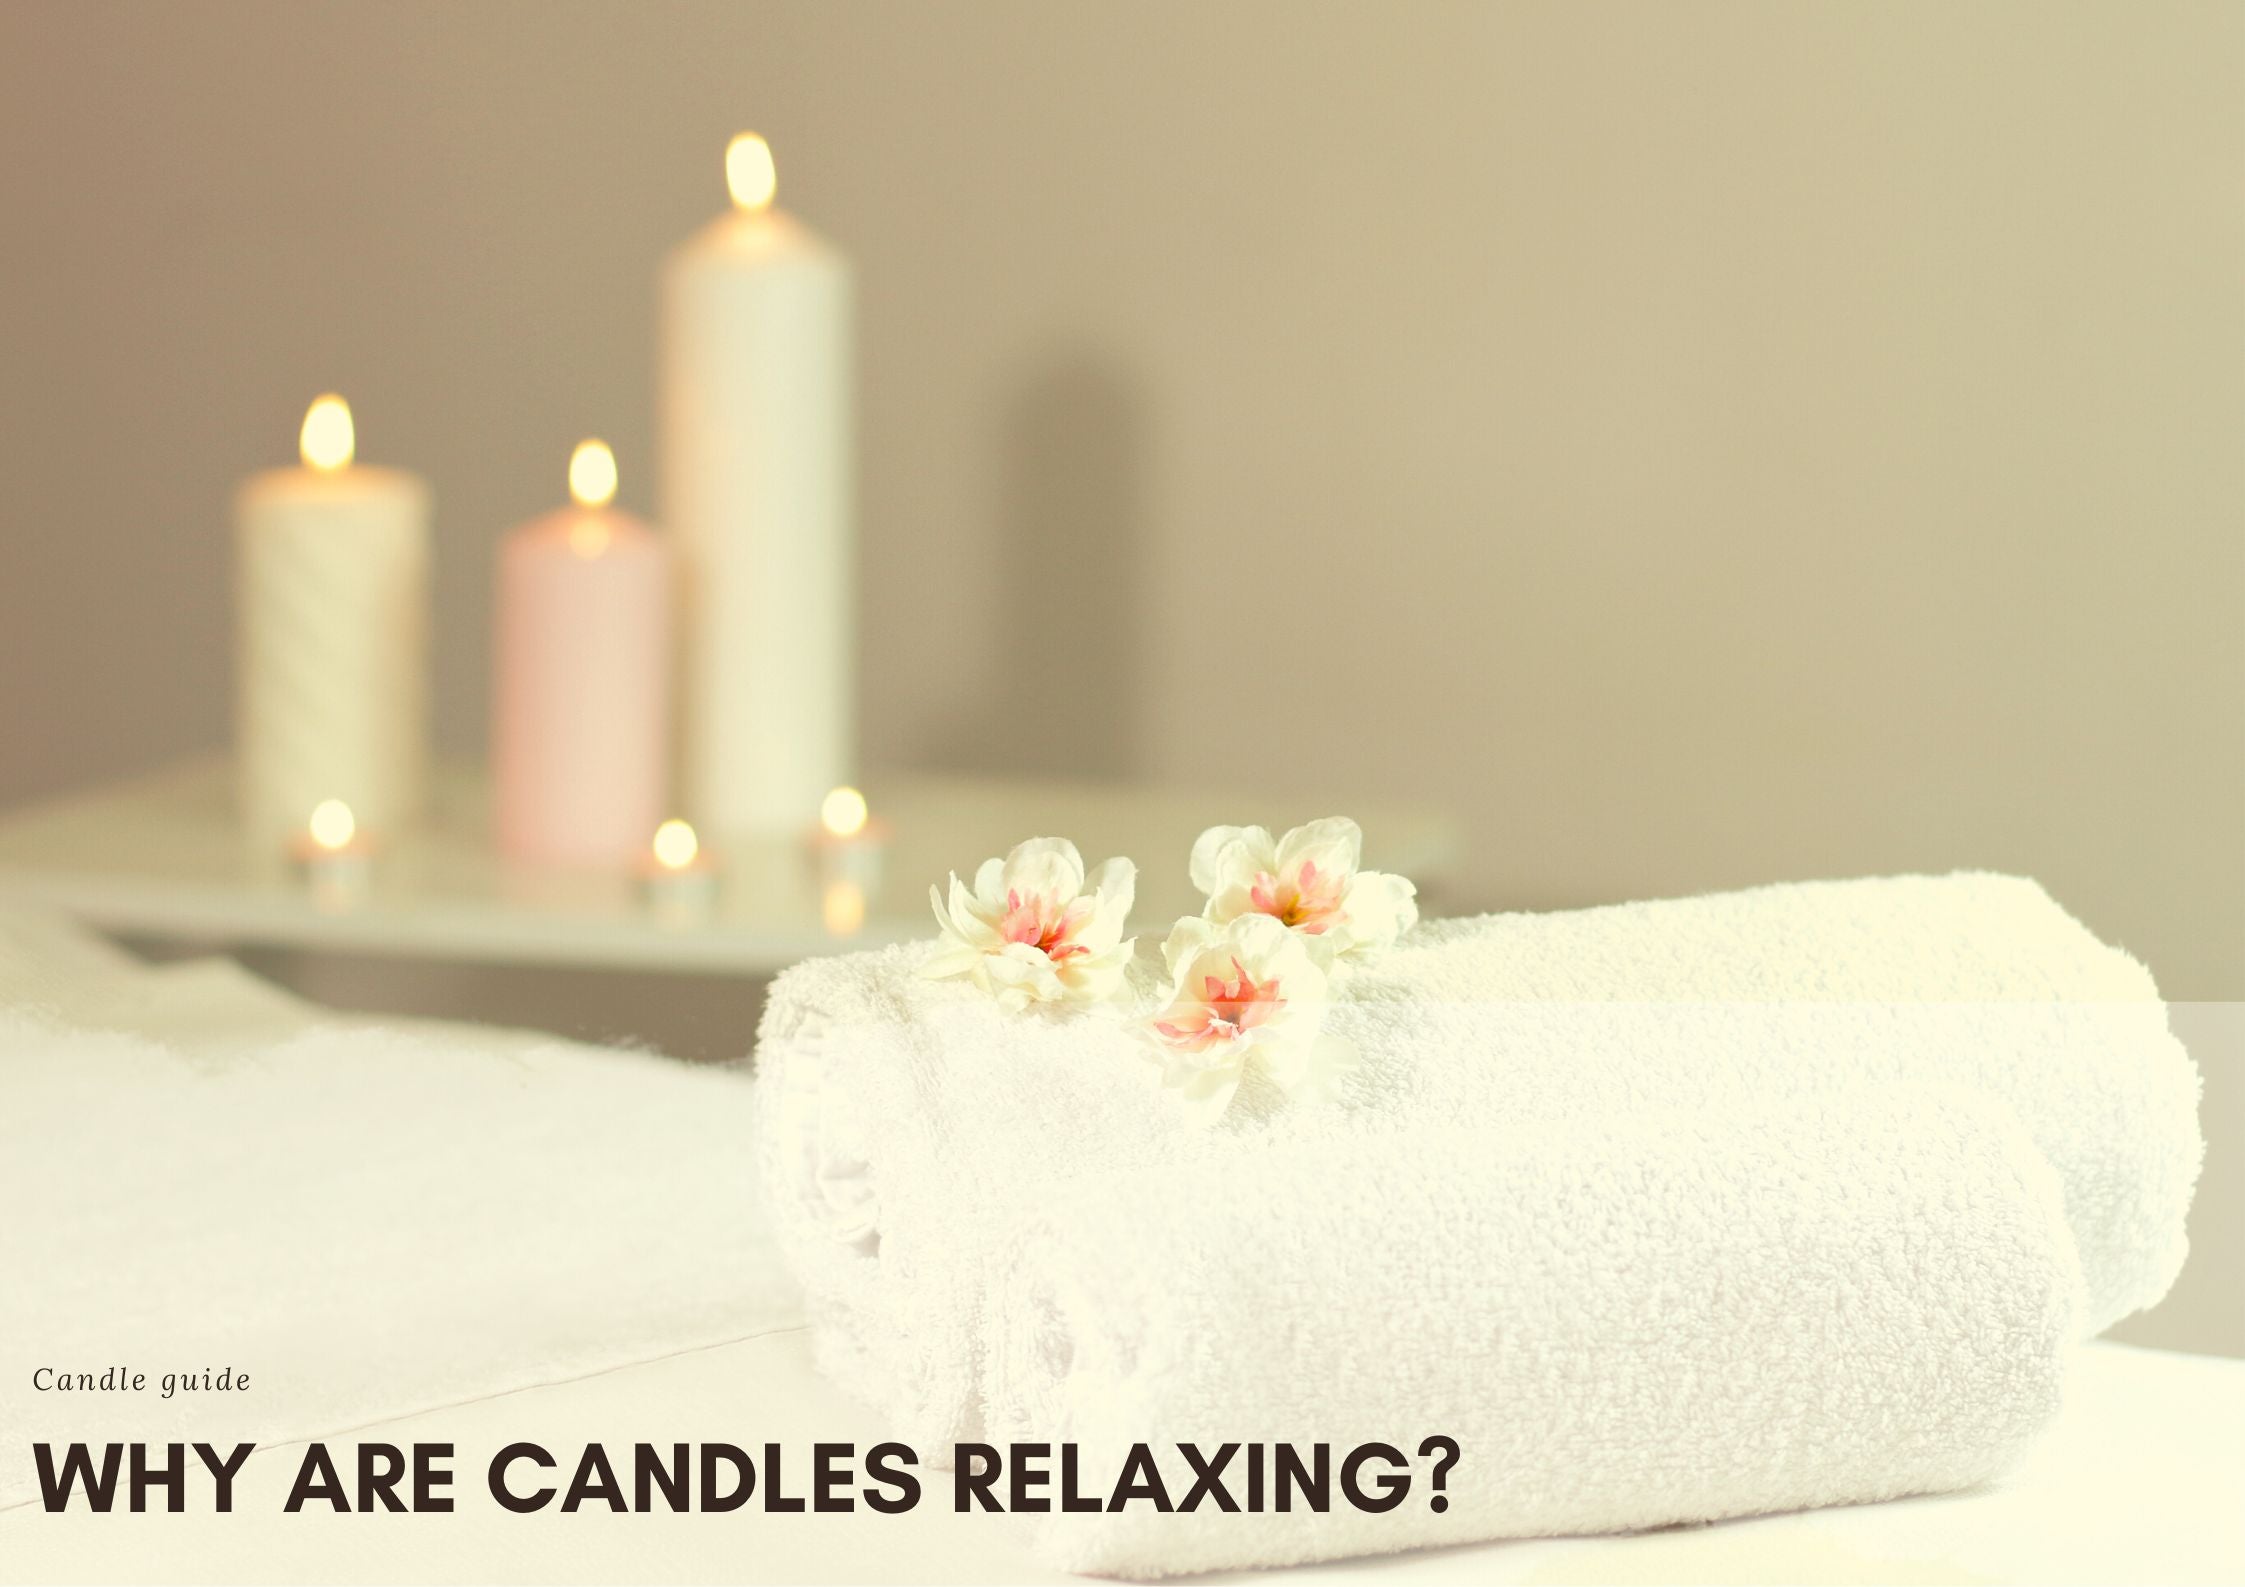 Why are candles relaxing?